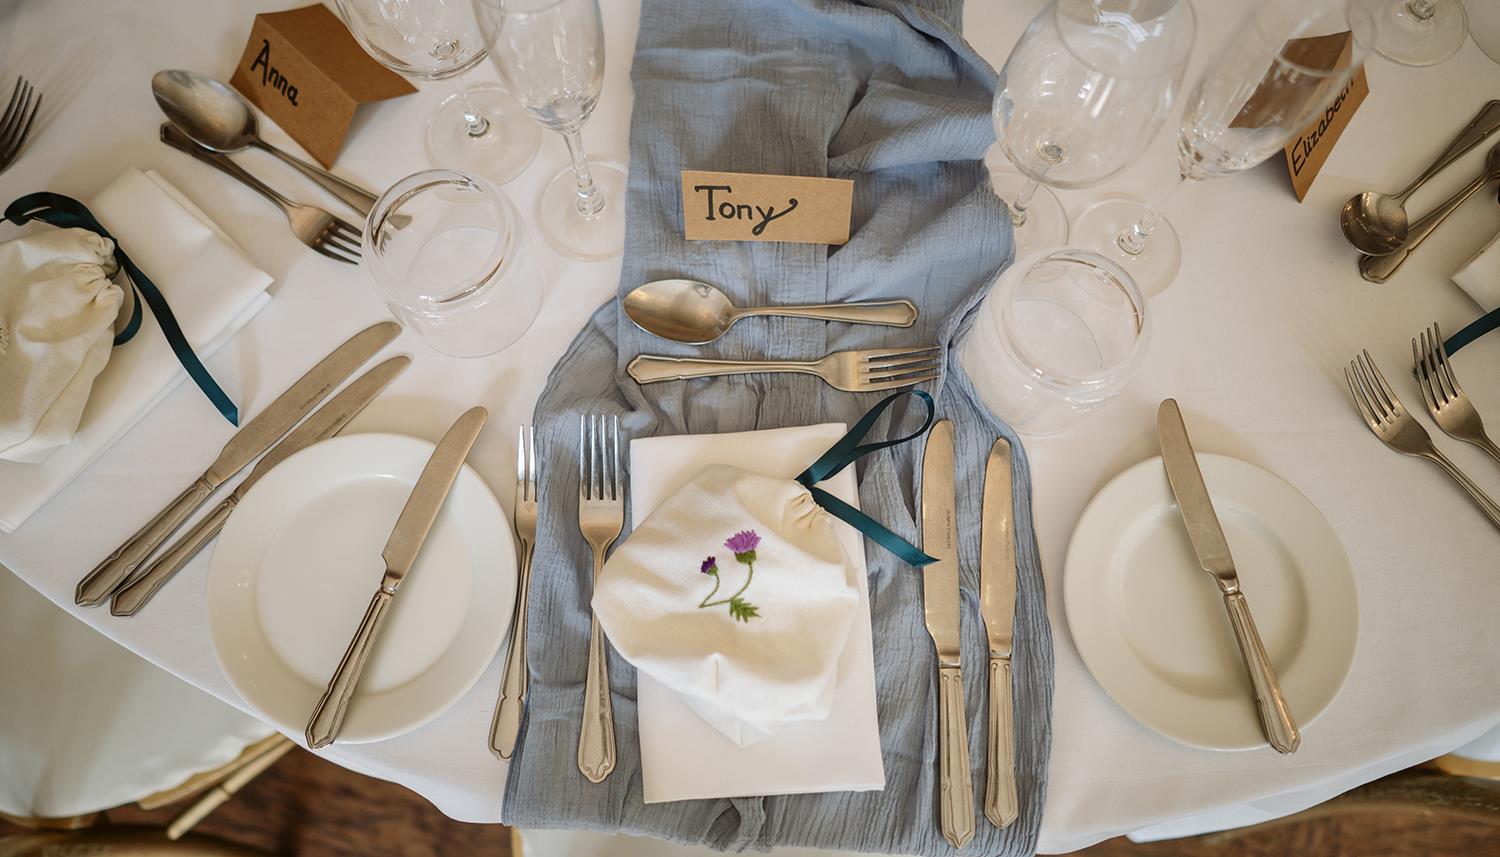 Place setting. Photo Credit: Lee Dann Photography